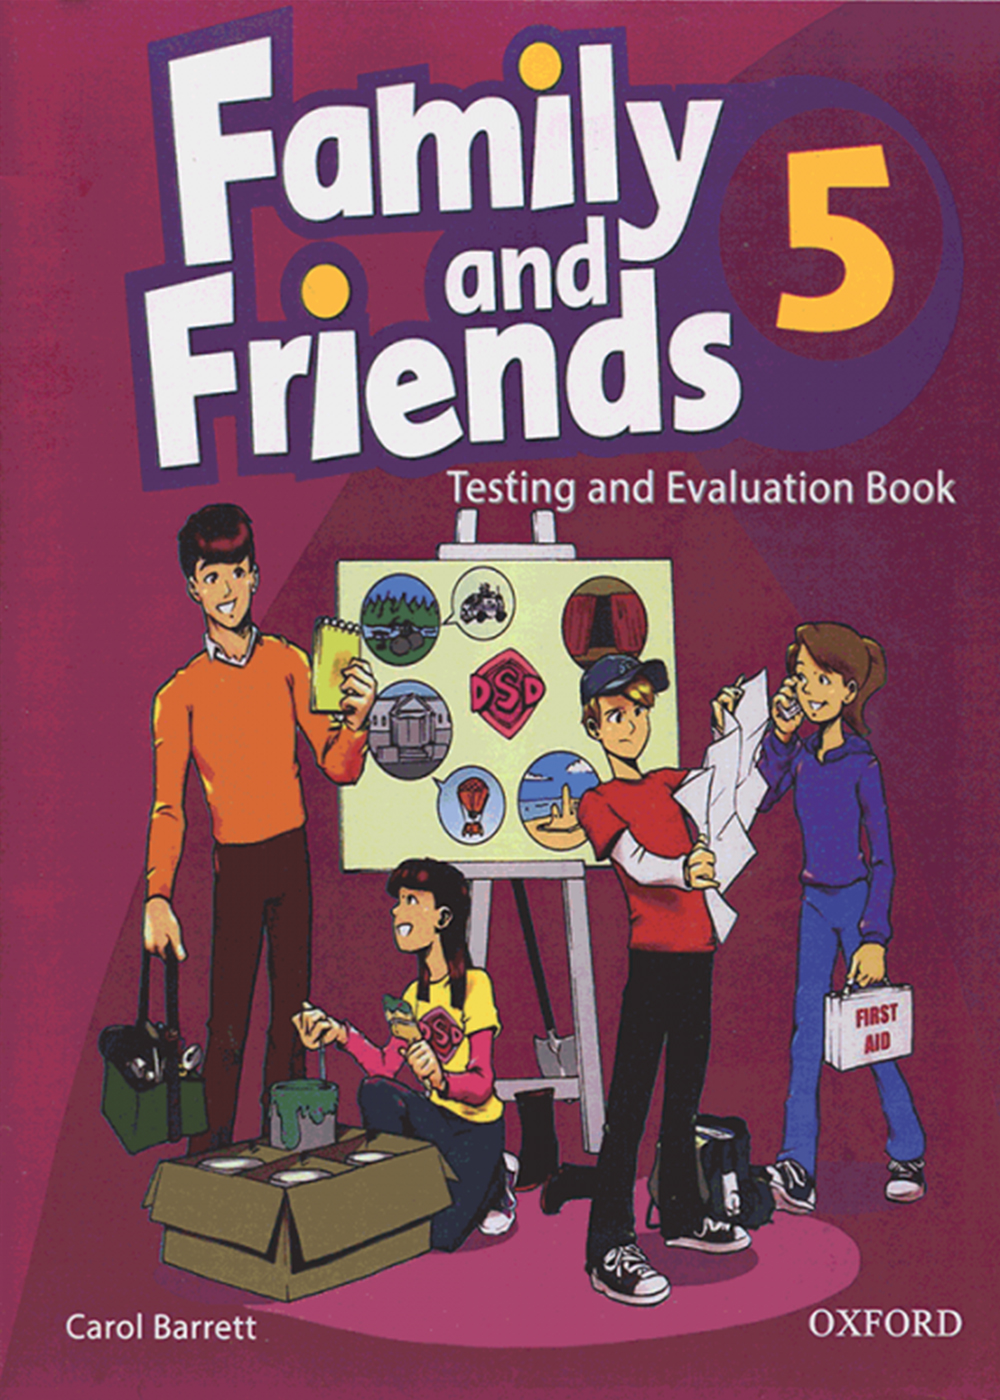 Тест семья 5 класс. Family and friends 5 Testing and evaluation book. Фэмили френдс 5. Family and friends 5 Workbook. Oxford Family and friends 5 класс.